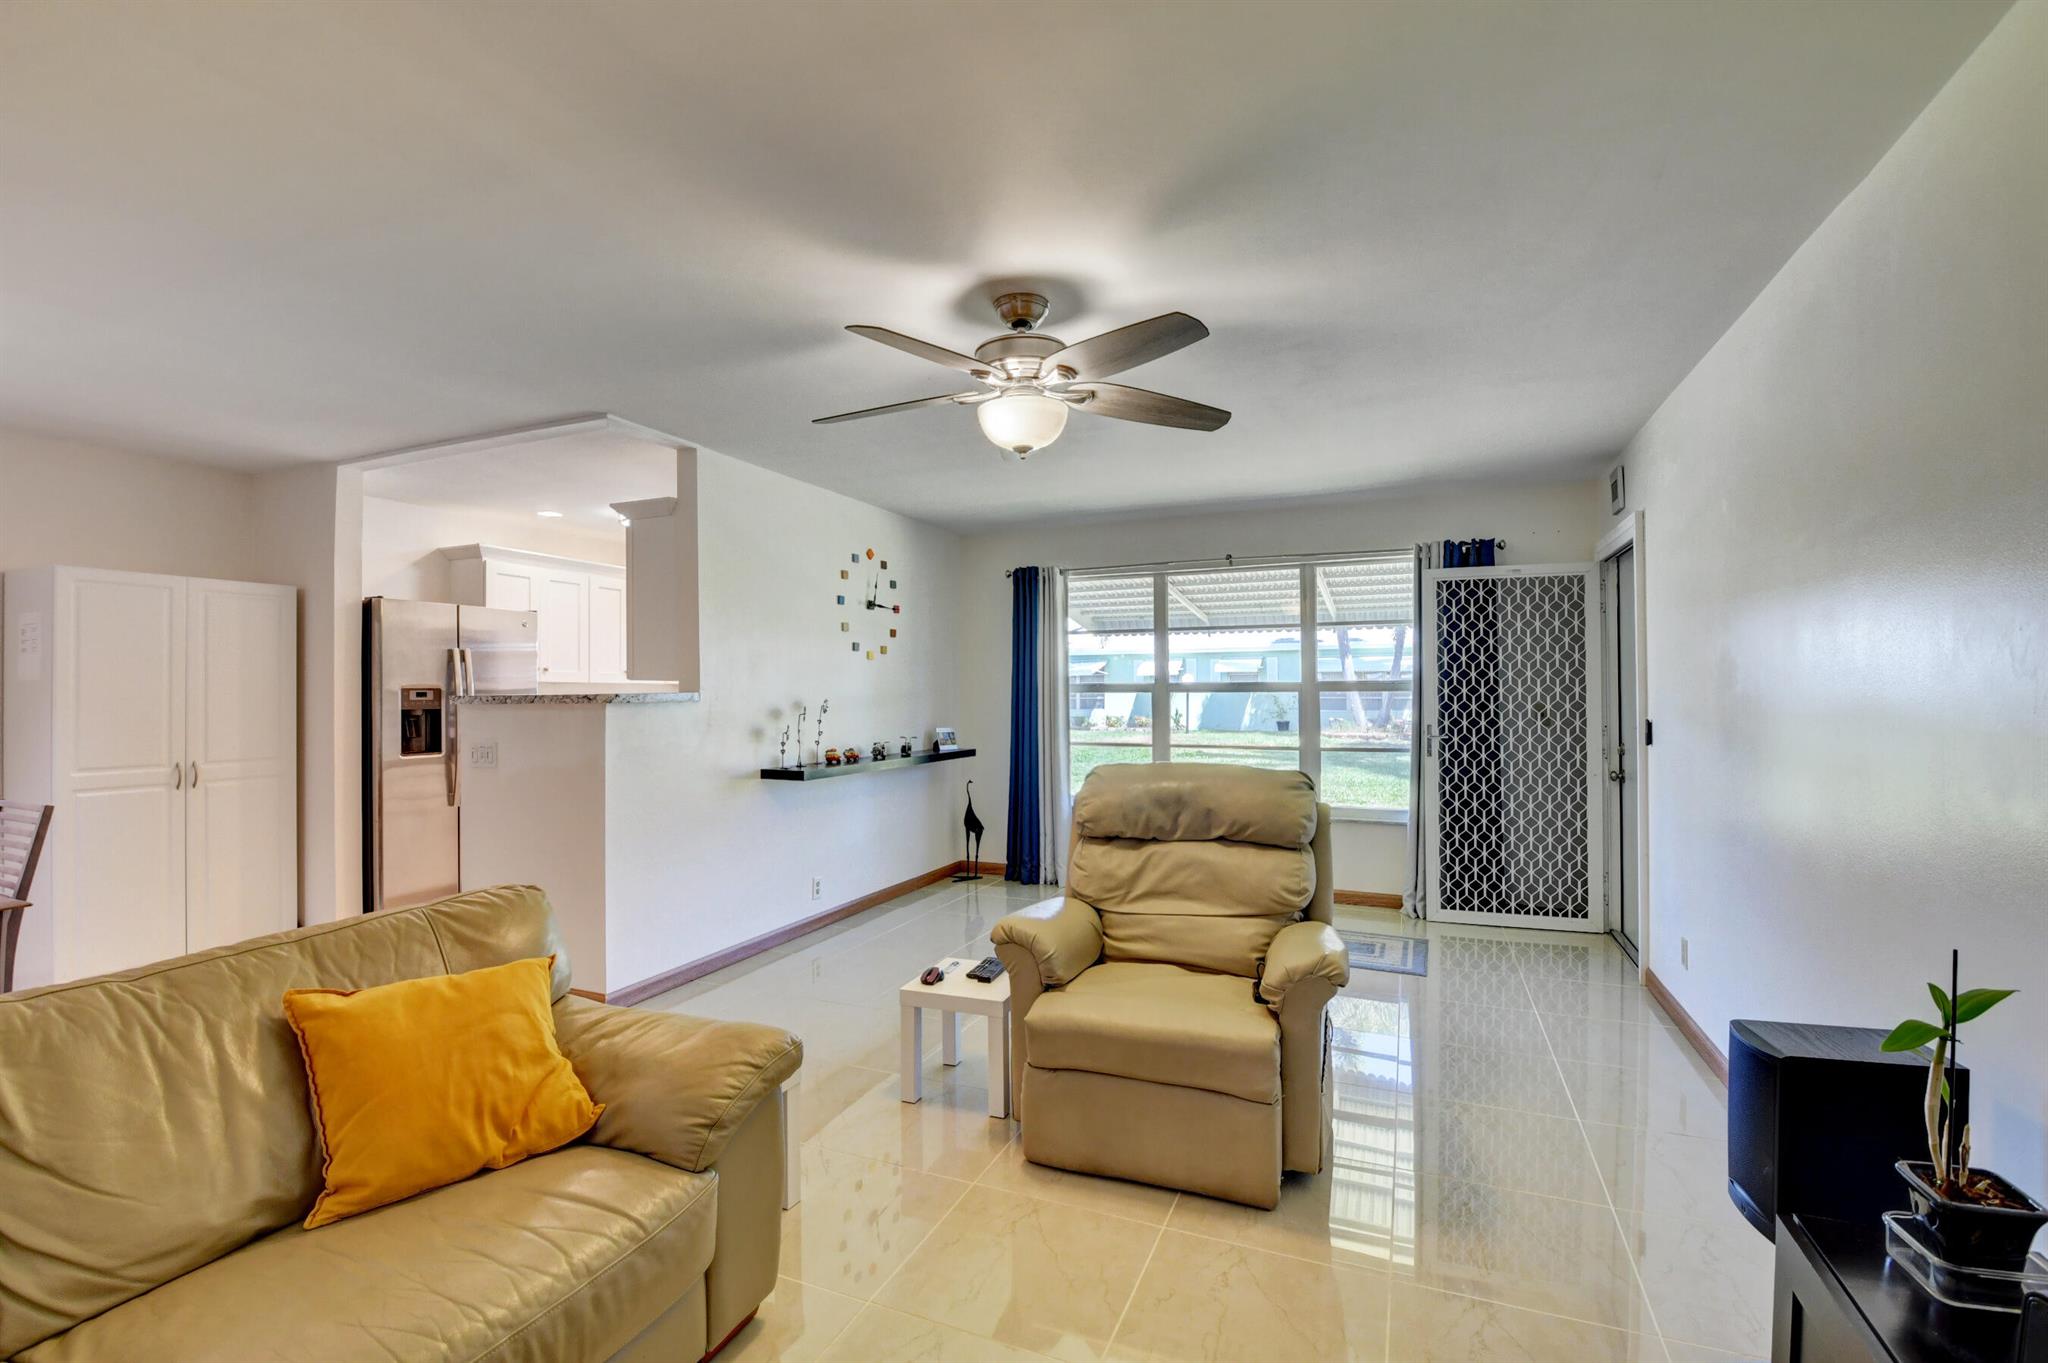 Pine Point Villas Condominiums is an Incredible gem in Boynton Beach. Features cozy villas in a well-established community that continues to attract 55 and over residents. The entire community was painted and roofs were redone in 2021 & 2022. This charming and pristine, turn-key 1 bedroom, 1-and-a-half-bathroom residence, with a bonus sunroom is spacious and bright with ceramic tile flooring throughout, updated kitchen cabinetry with newer appliances.  Newer A/C, fridge, microwave, 3 ceiling fans, electrical panel, & LED recessed lighting. Laundry room located in each building 4 units per building. Community Clubhouse features activities to fit any lifestyle. Heated pool, shuffleboard, billiards, card room and social gatherings. Minutes from the beach, I-95, PBIA, malls & Rosemary Square.